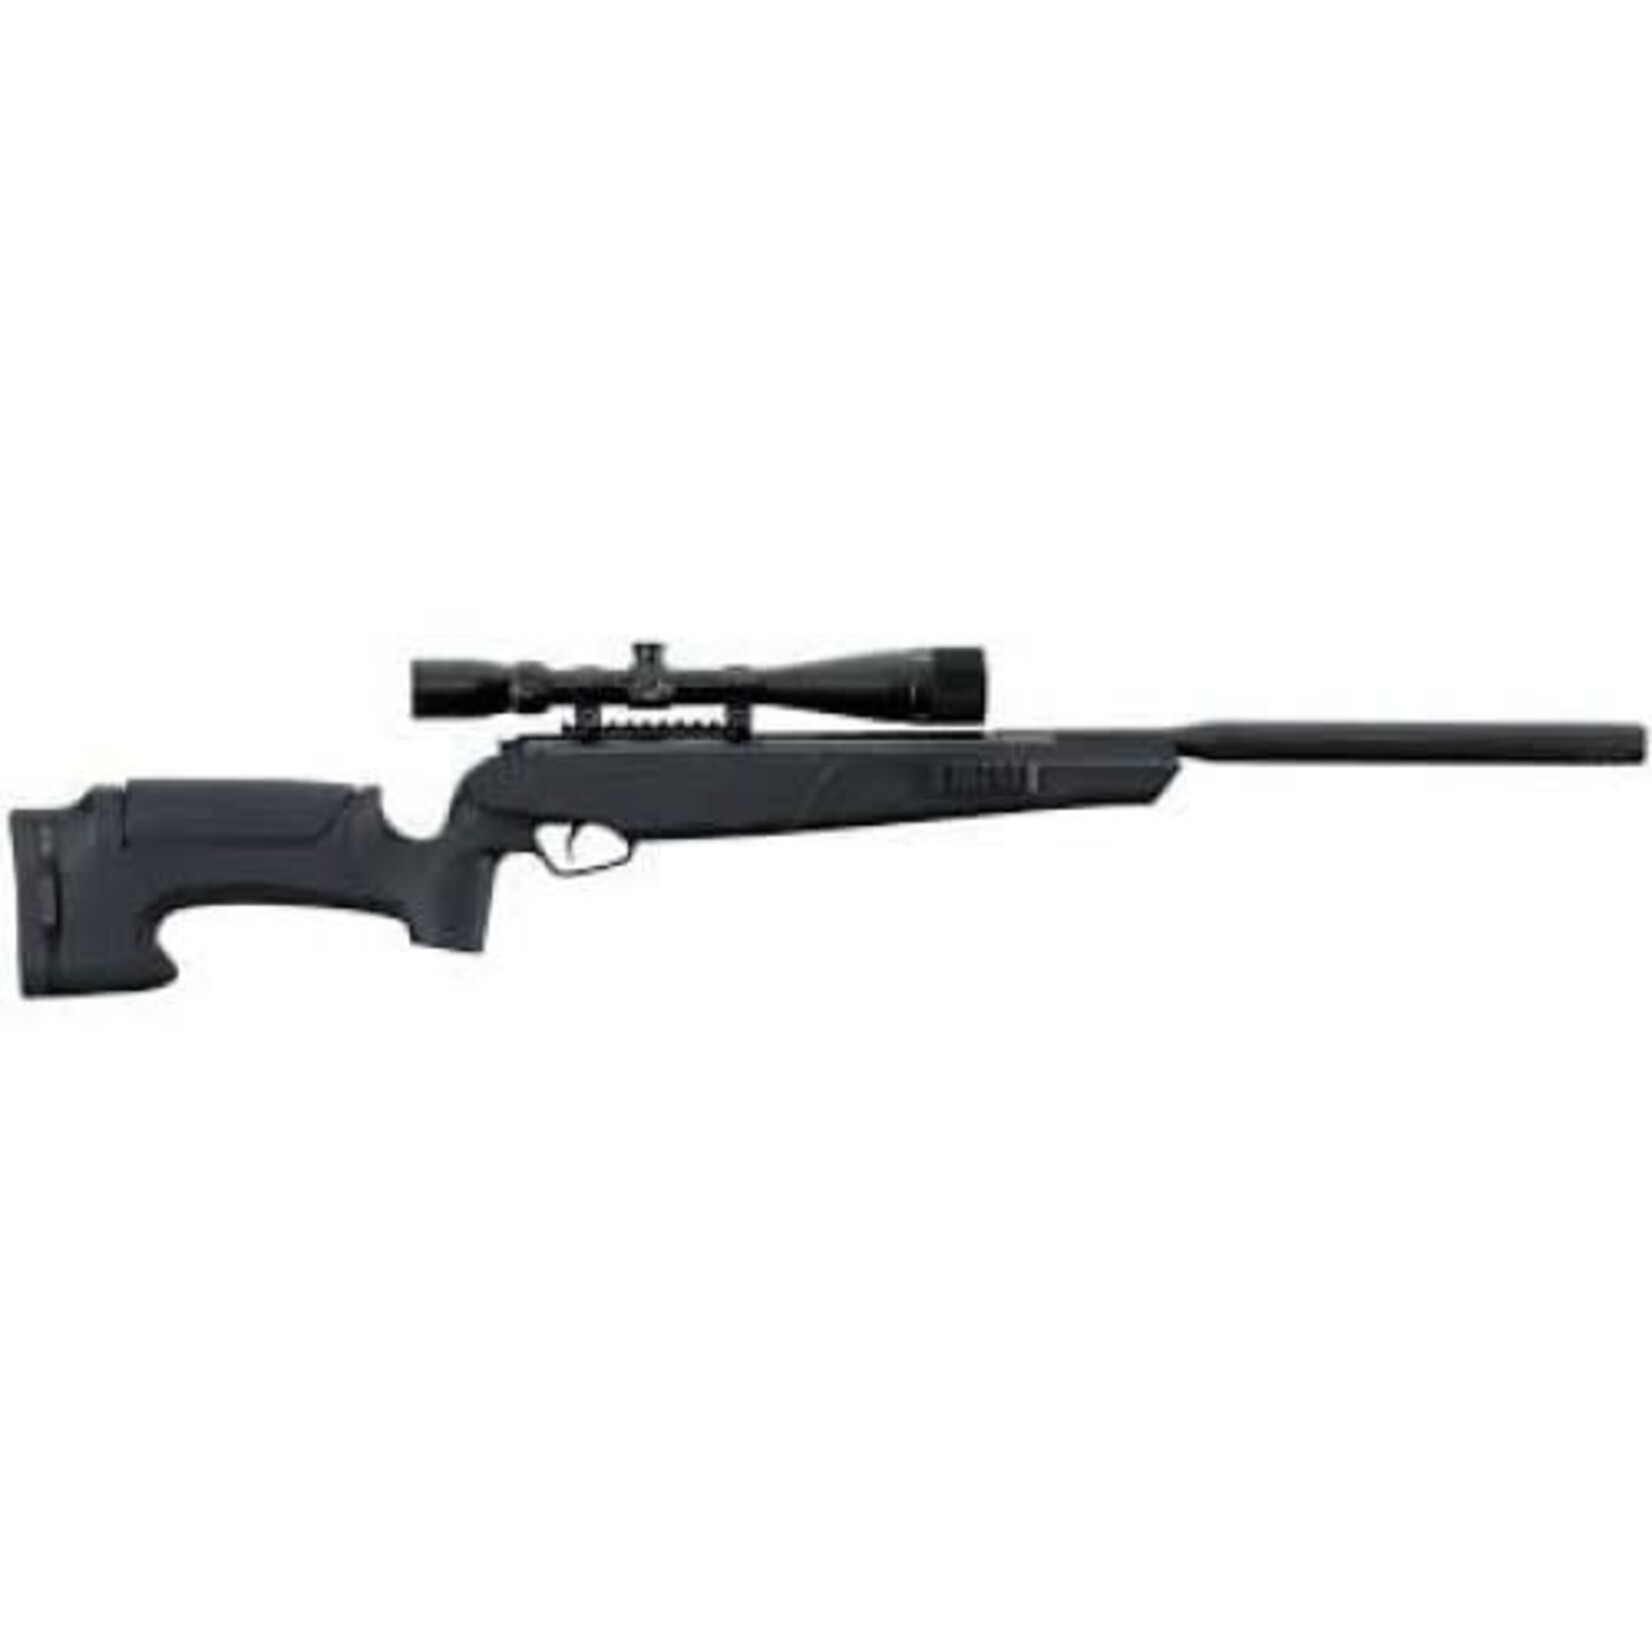 Stoeger Stoeger ATAC 22Air rifle, Bipod, 4-16x40 Scope Package